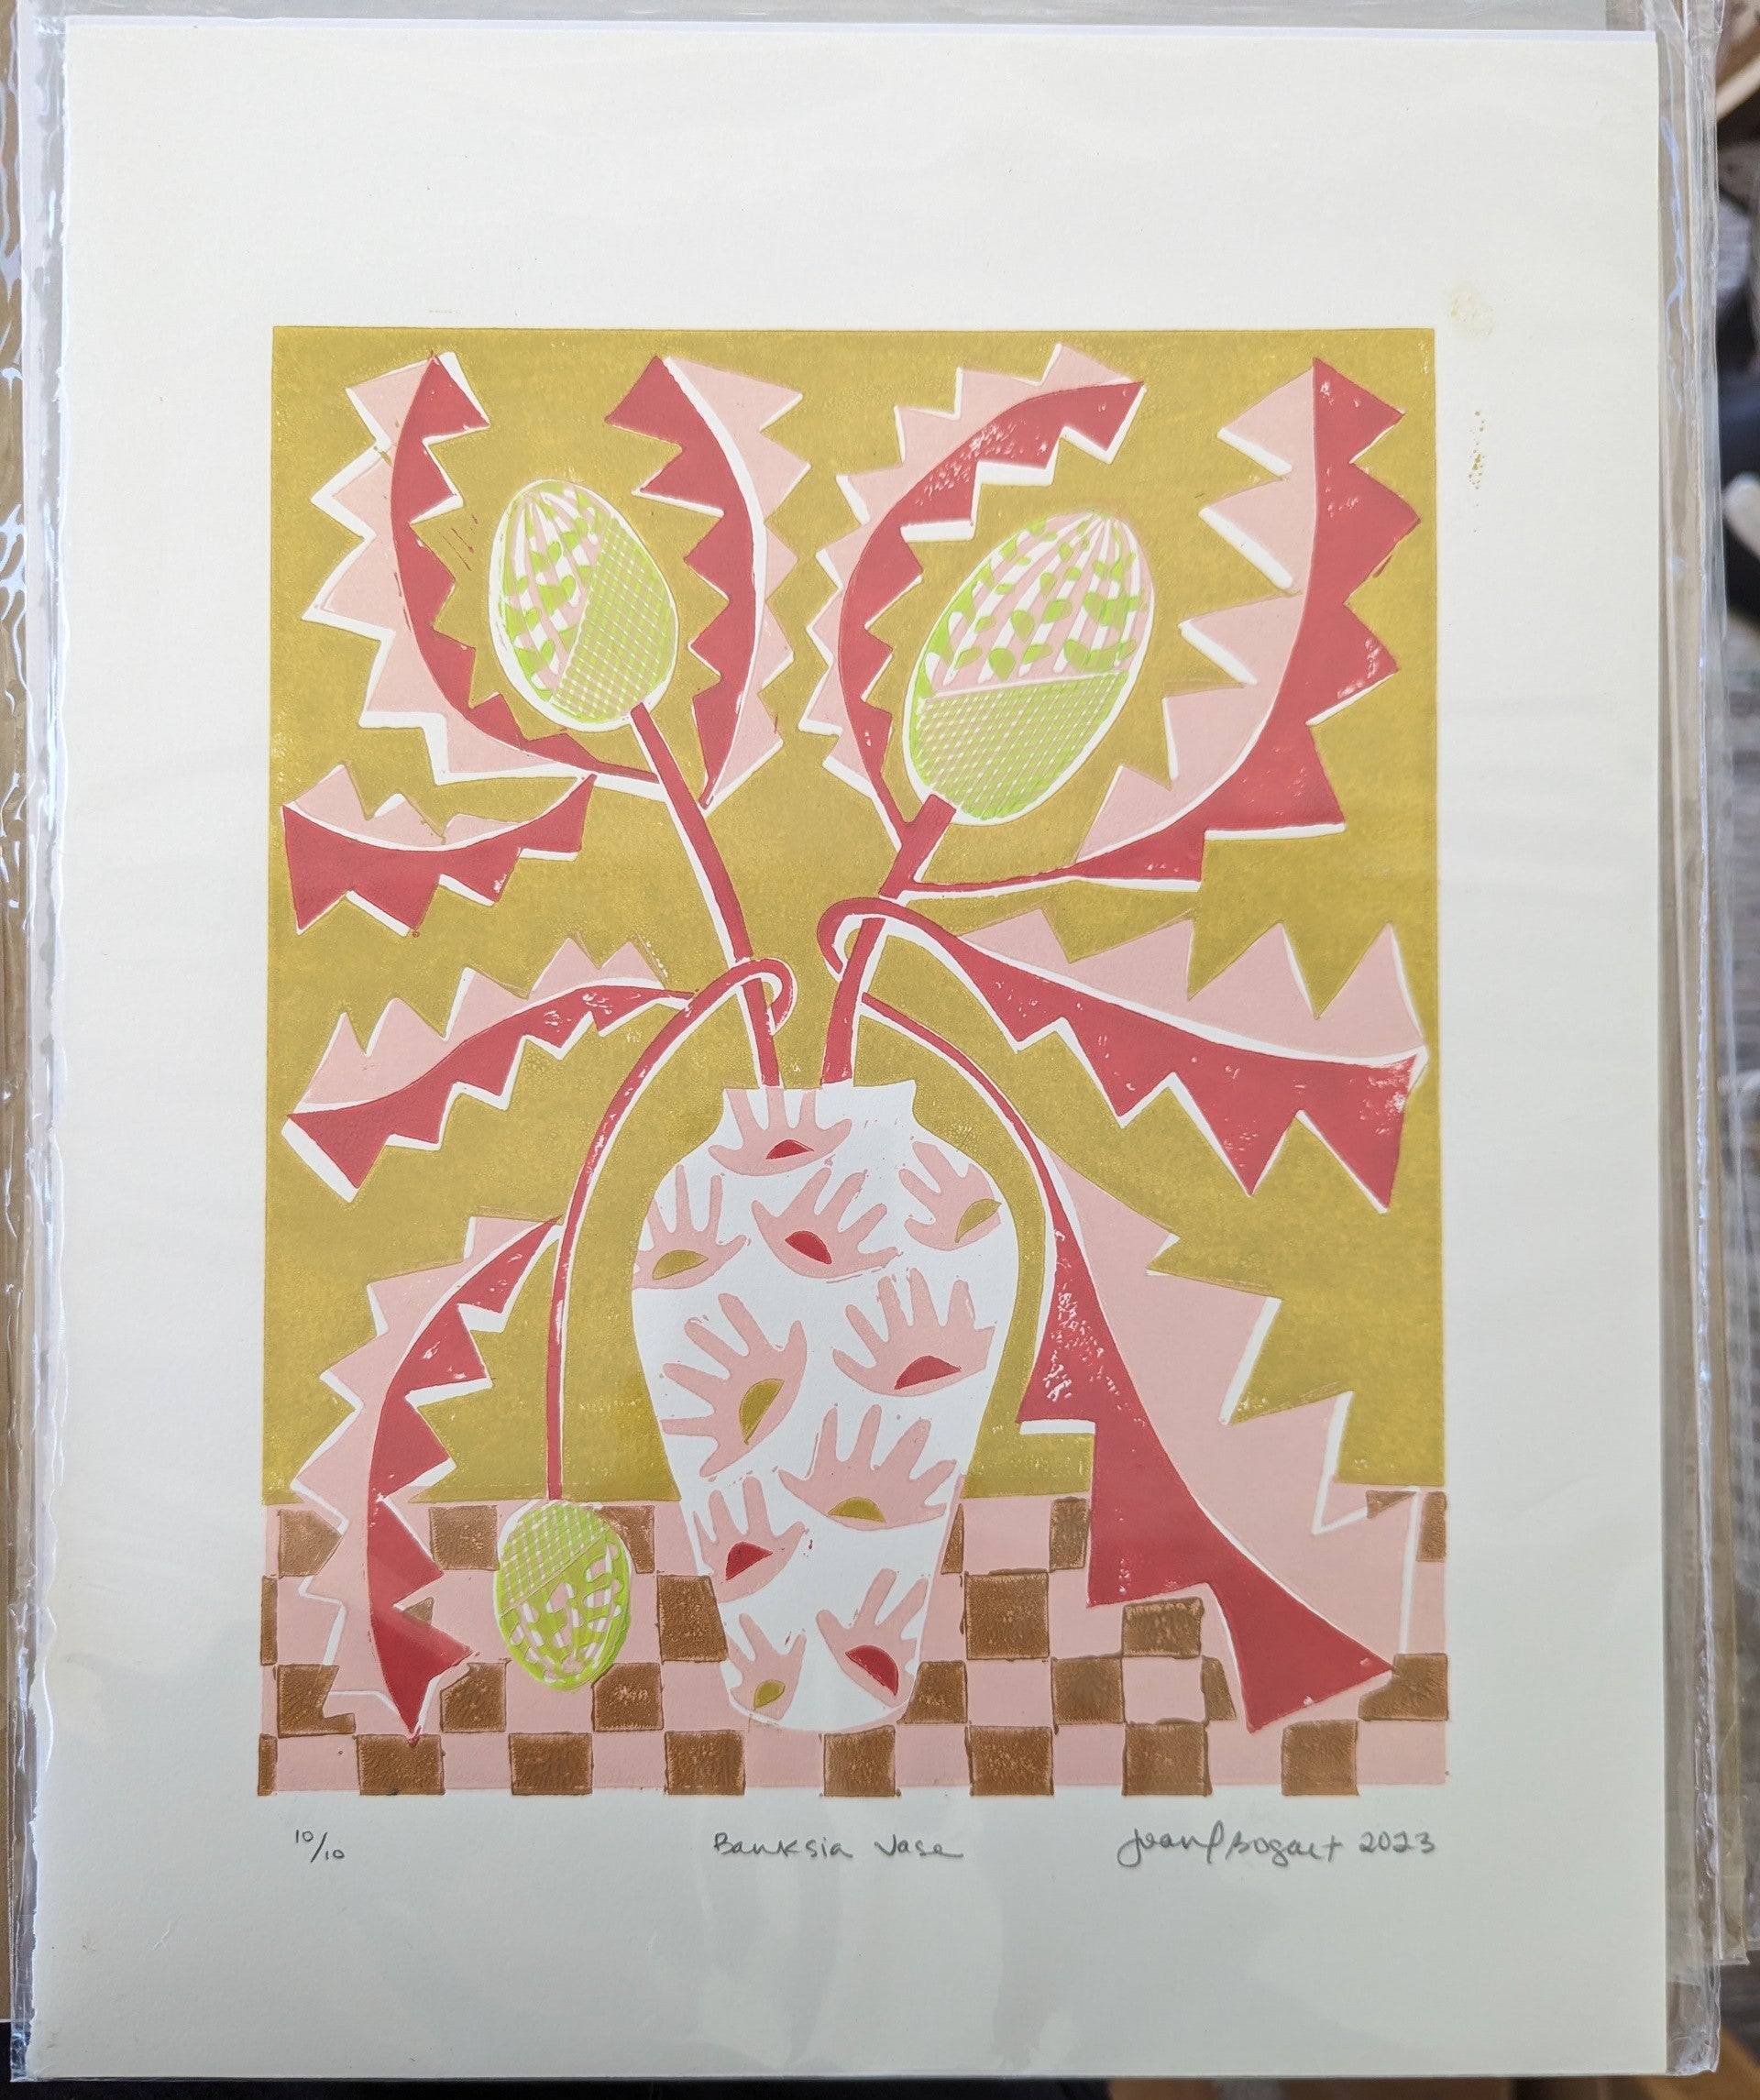 Banksia Vase Art print with yellow flowers in wood frame